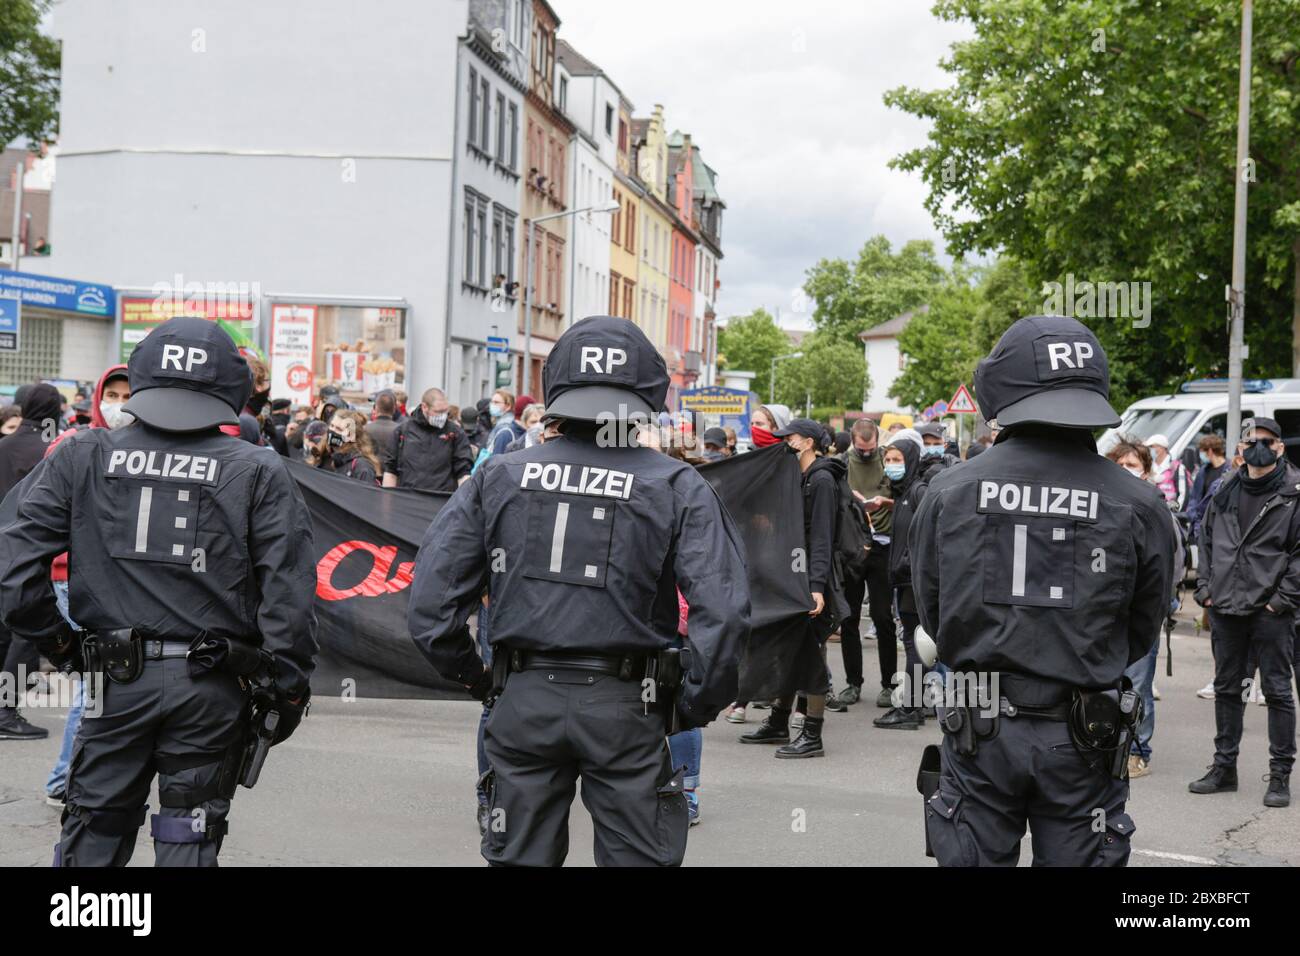 Worms, Germany. 6th June 2020. Police officers watch the counter protest in full riot gear. Around 50 right-wing protesters marched through the city centre of Worms for the 12. and last 'Day of the German Future’. The march was cut short due to several thousand counter protesters who blocked the  path of the right-wing march. The march was a yearly right-wing event in different German city that drew over 1000 protesters at its high-point. Stock Photo